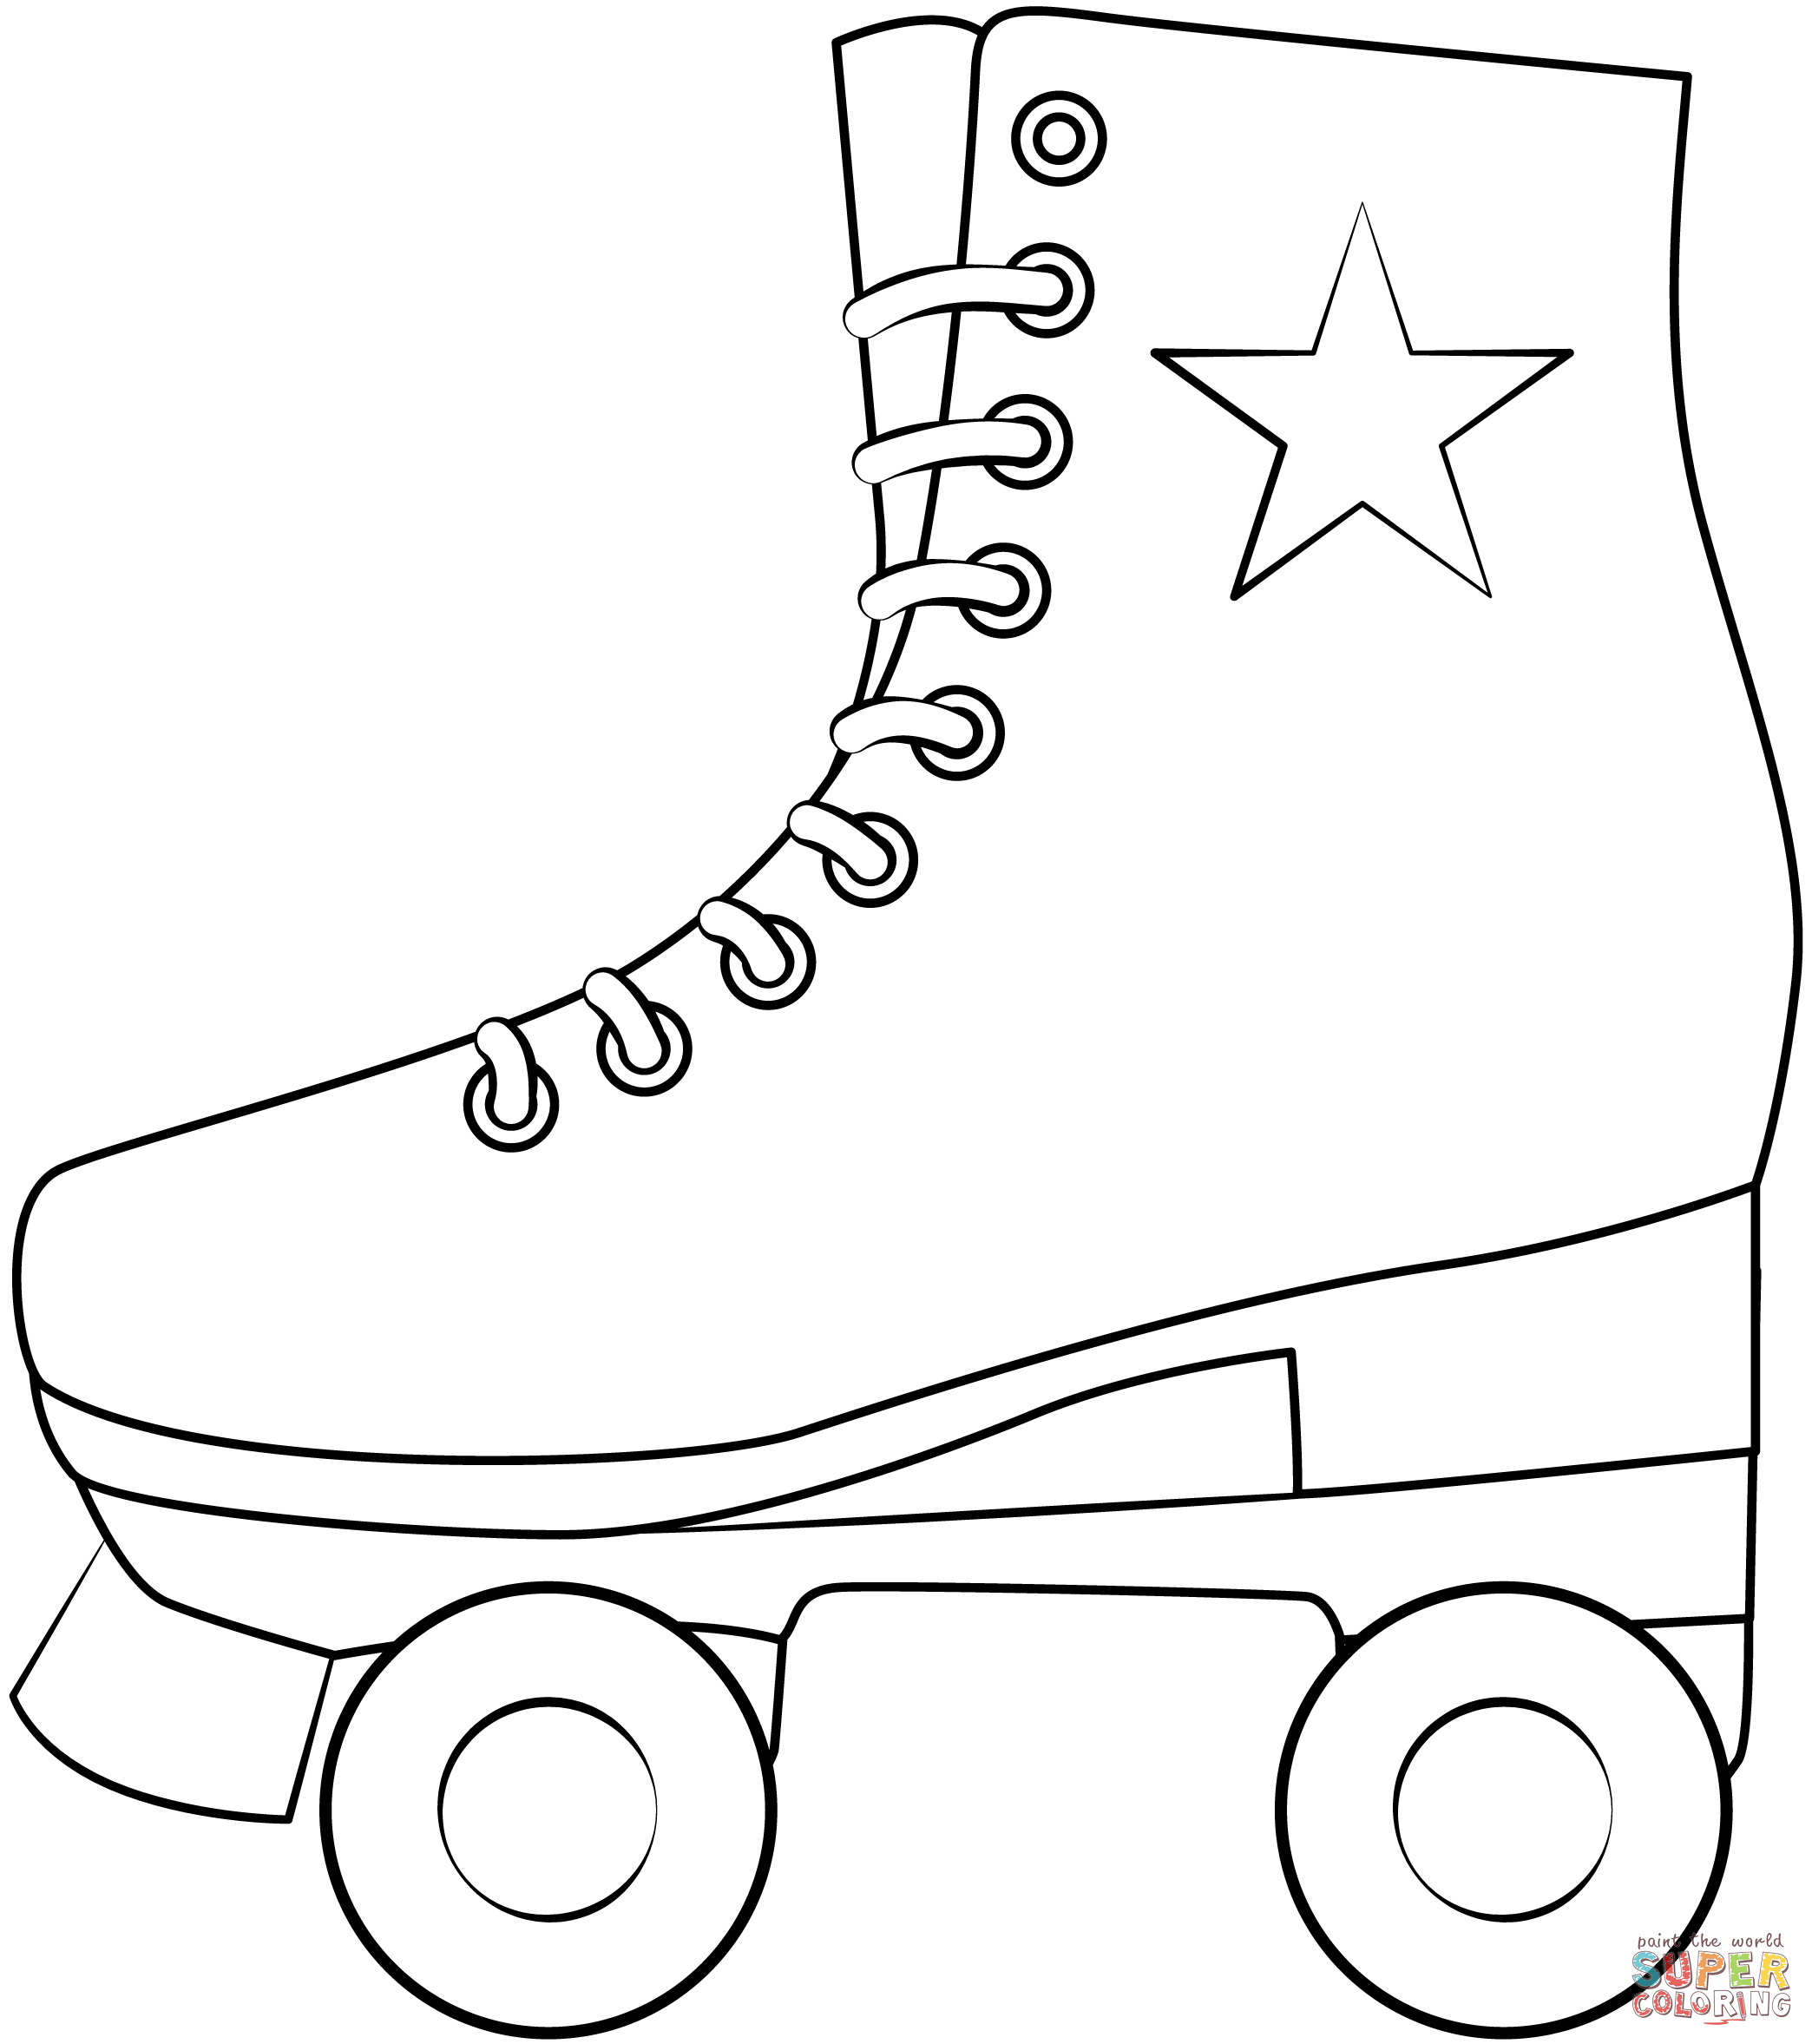 Roller Skate coloring page | Free Printable Coloring Pages